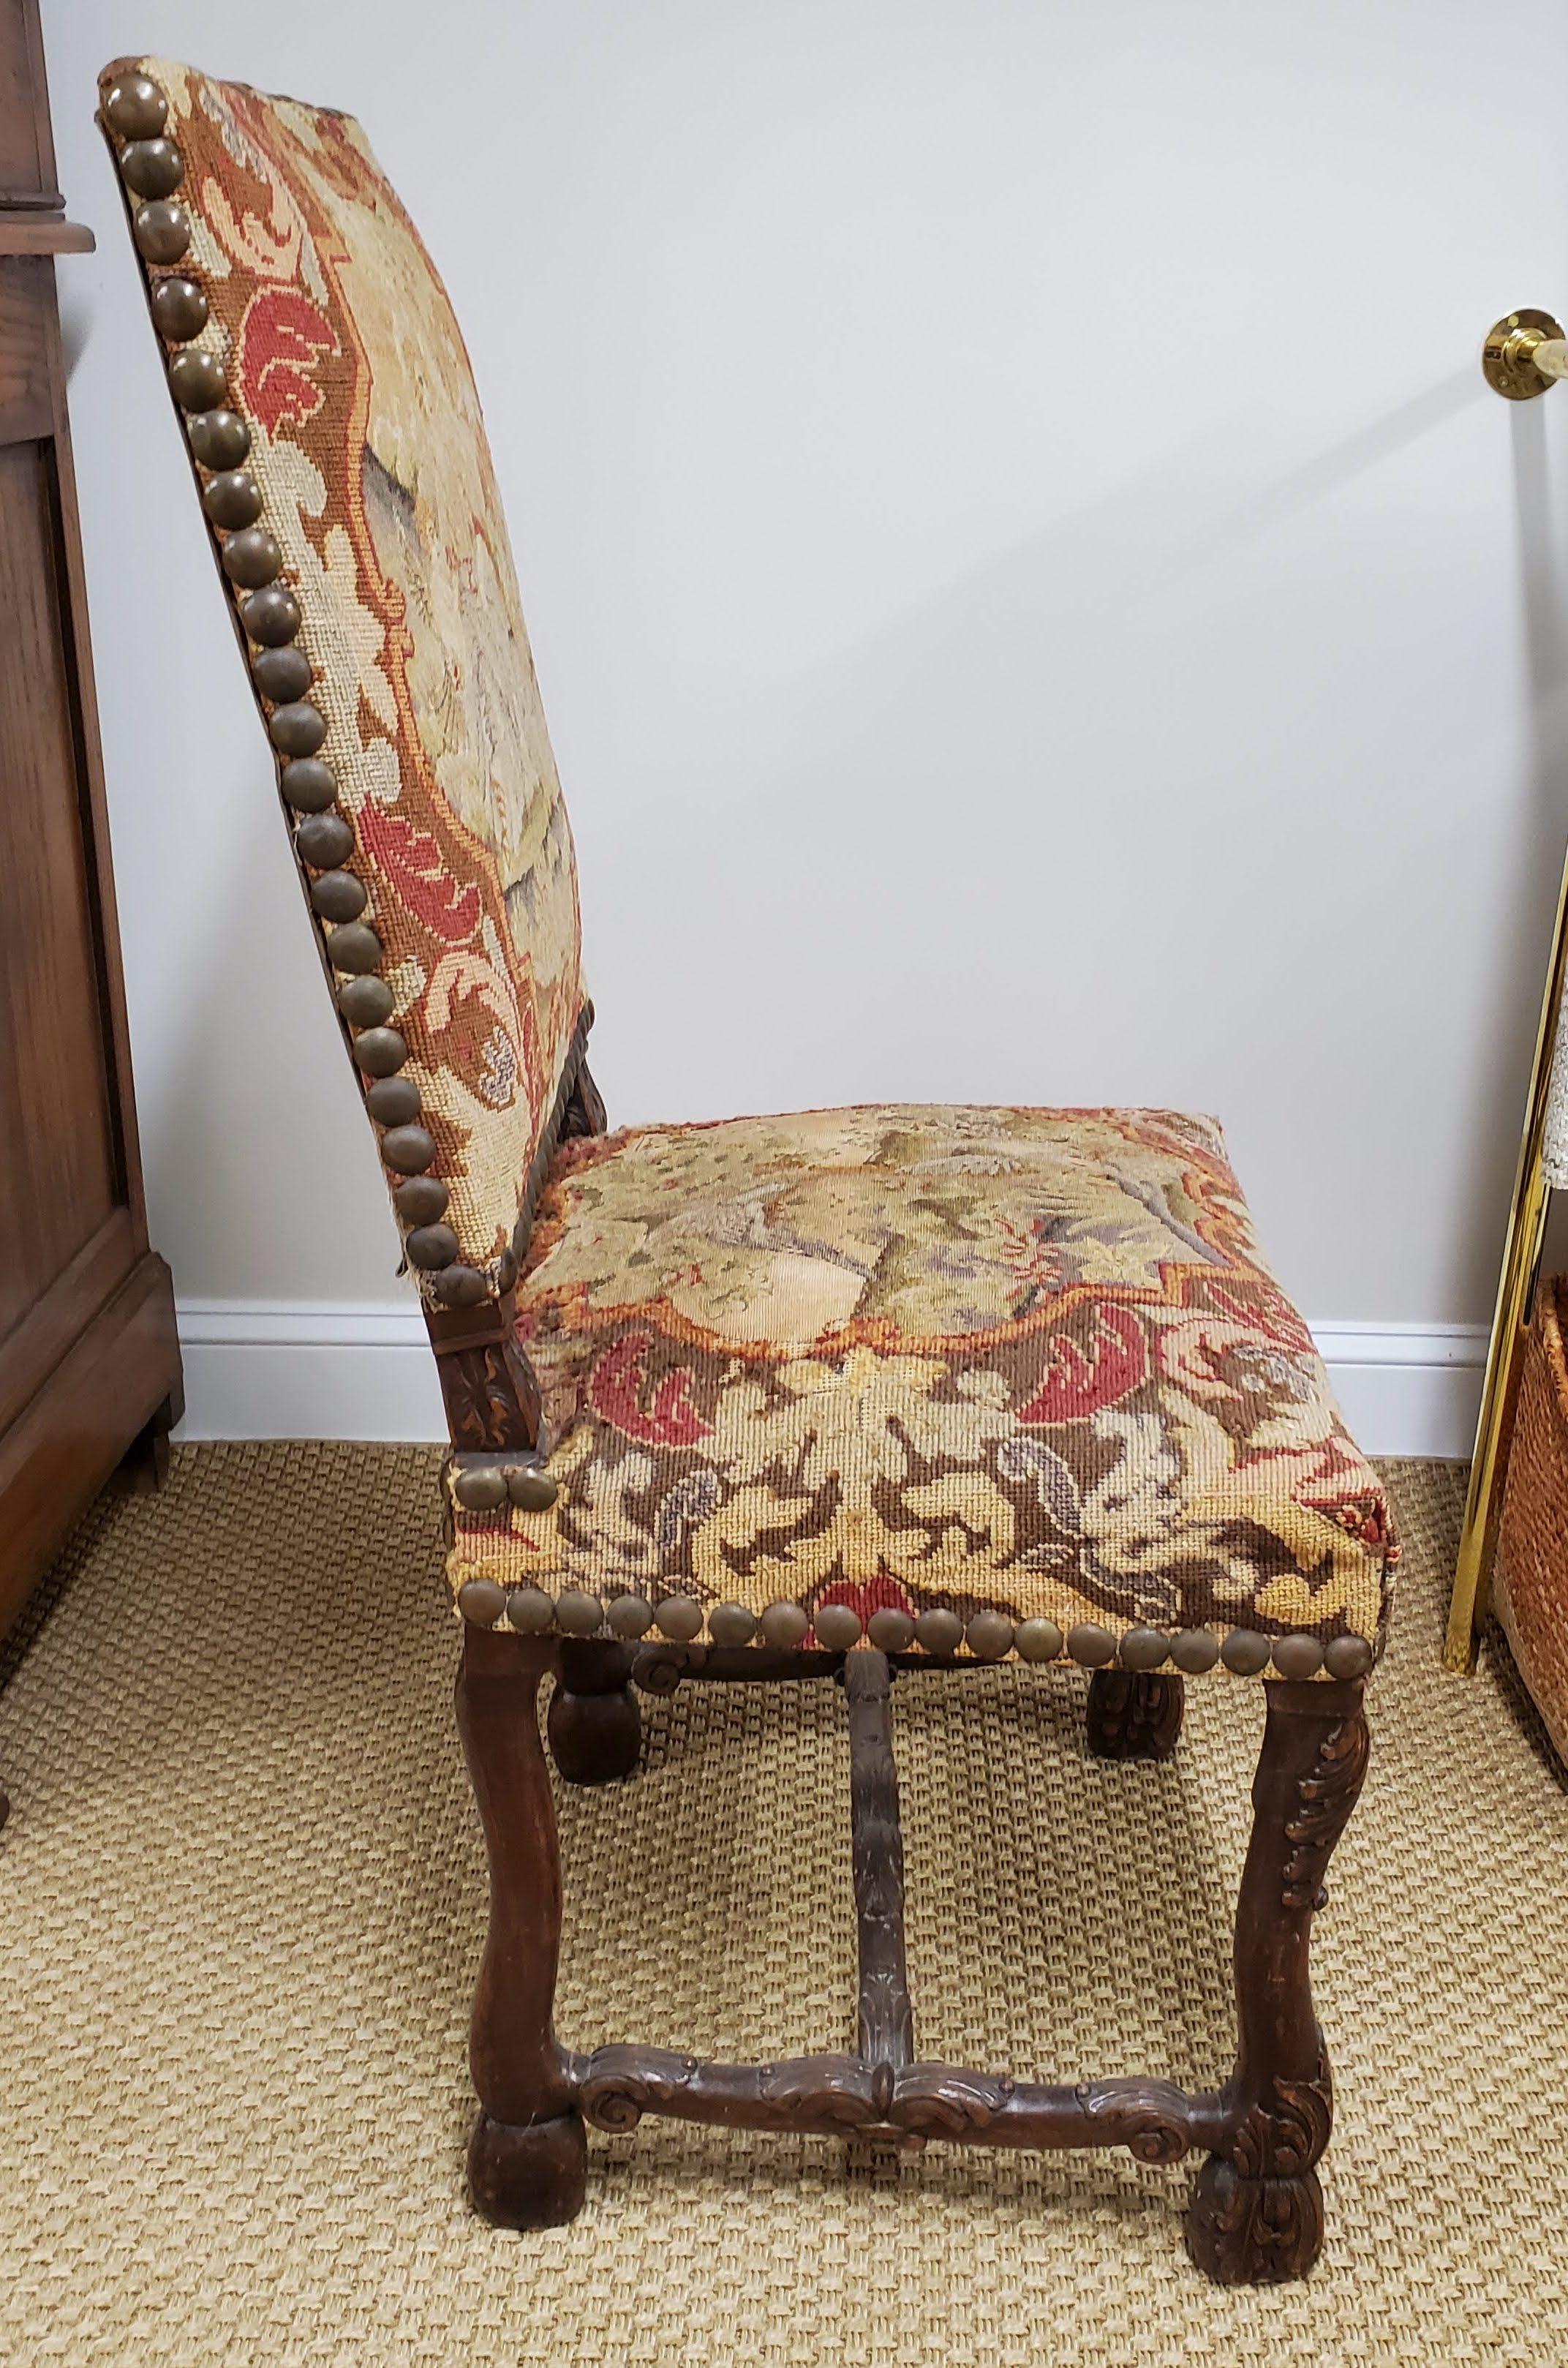 17th Century French Provincial Louis XIII period needlepoint & walnut side chair
Unusual 17th century French Provincial Louis XIII period side chair made of richly patinated Circassian walnut with a deep lustrous color. Intricate carved decoration